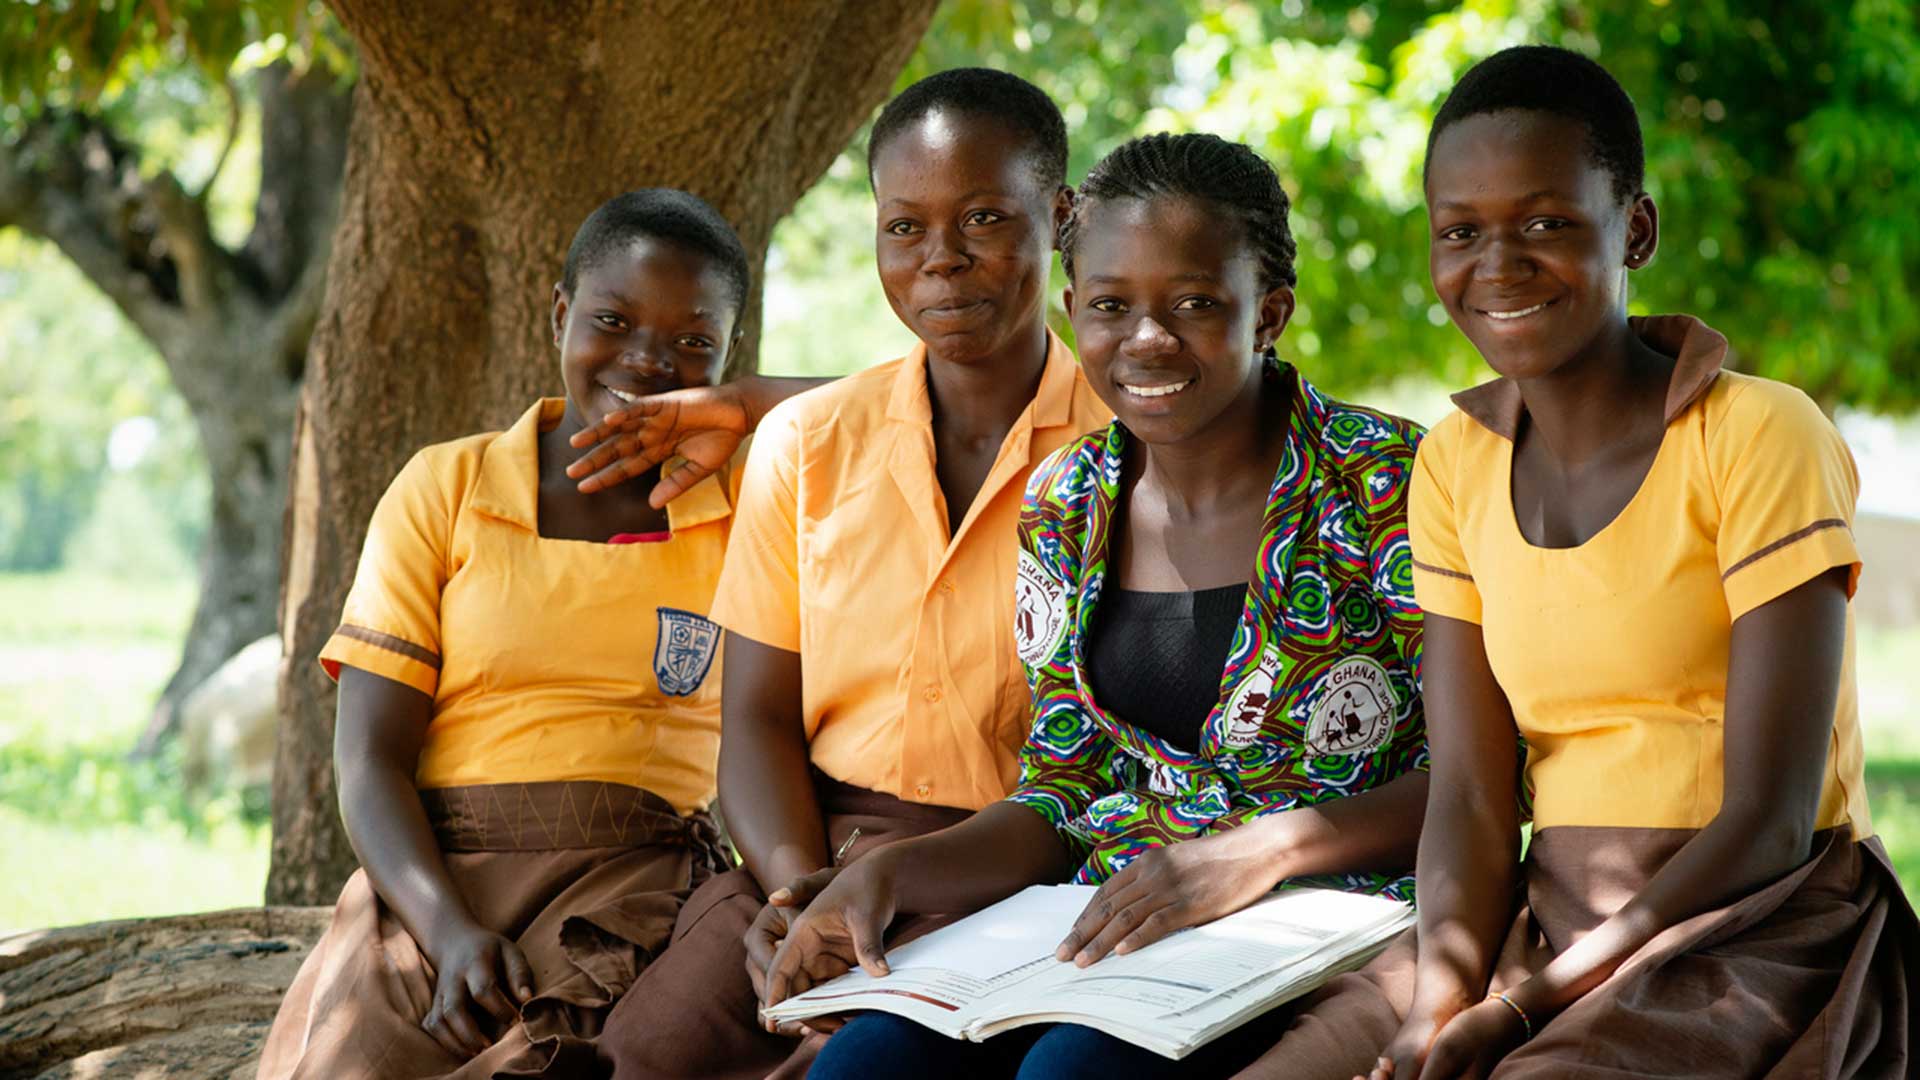  Learning from success: Supporting girls and sustainable development